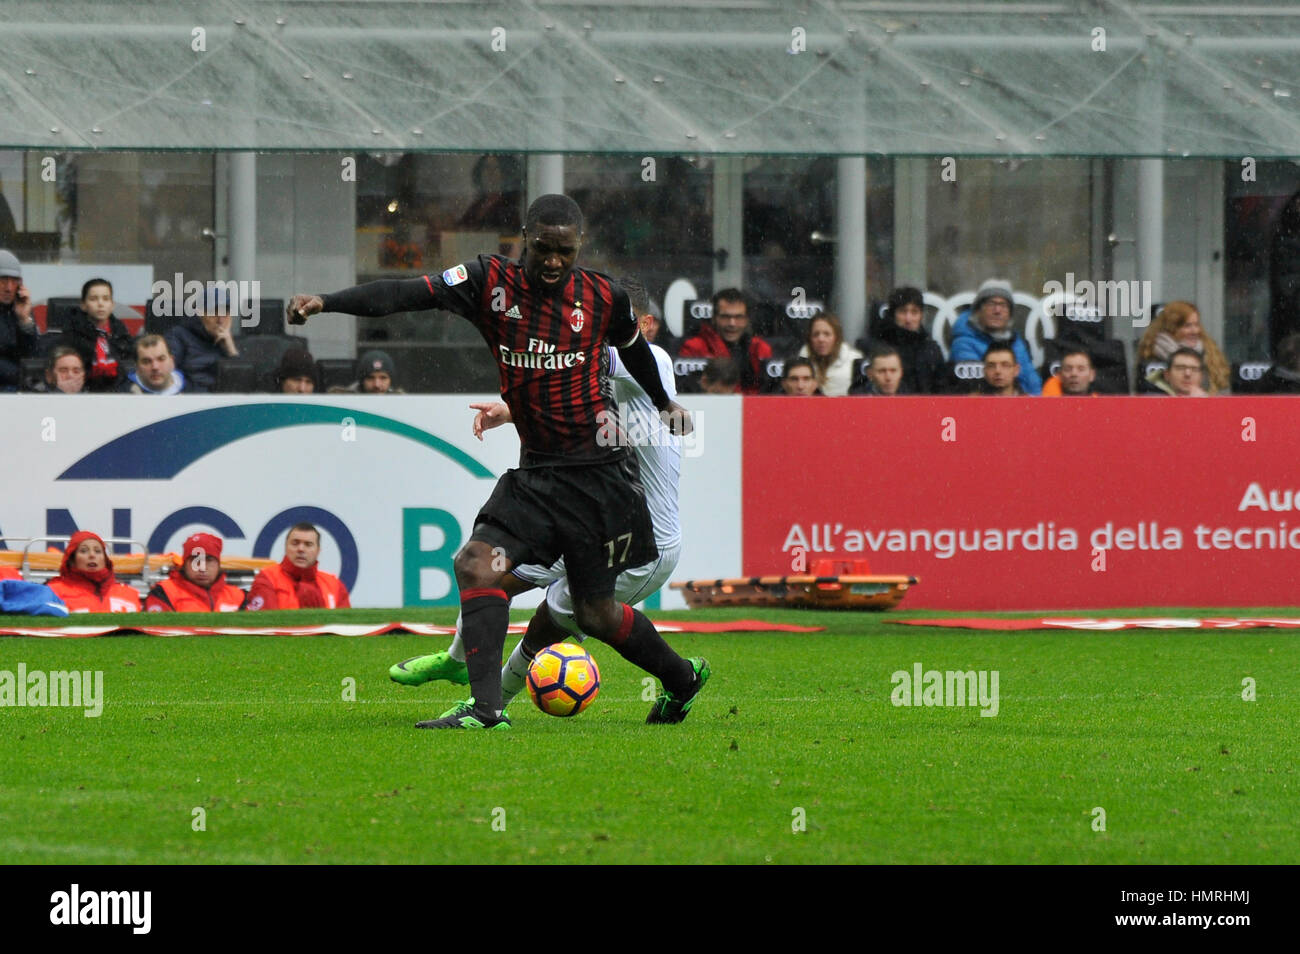 Milan, Italy. 05th Feb, 2017. Cristián Zapata of AC Milan in actions during AC Milan versus Sampdoria, as part of italian Serie A football match During match Milan vs Sampdoria Luis Muriel of Sampdoria convert to goal the penaltyThe result is Milan 0 Sampdoria 1. Credit: Gaetano Piazzolla/Pacific Press/Alamy Live News Stock Photo